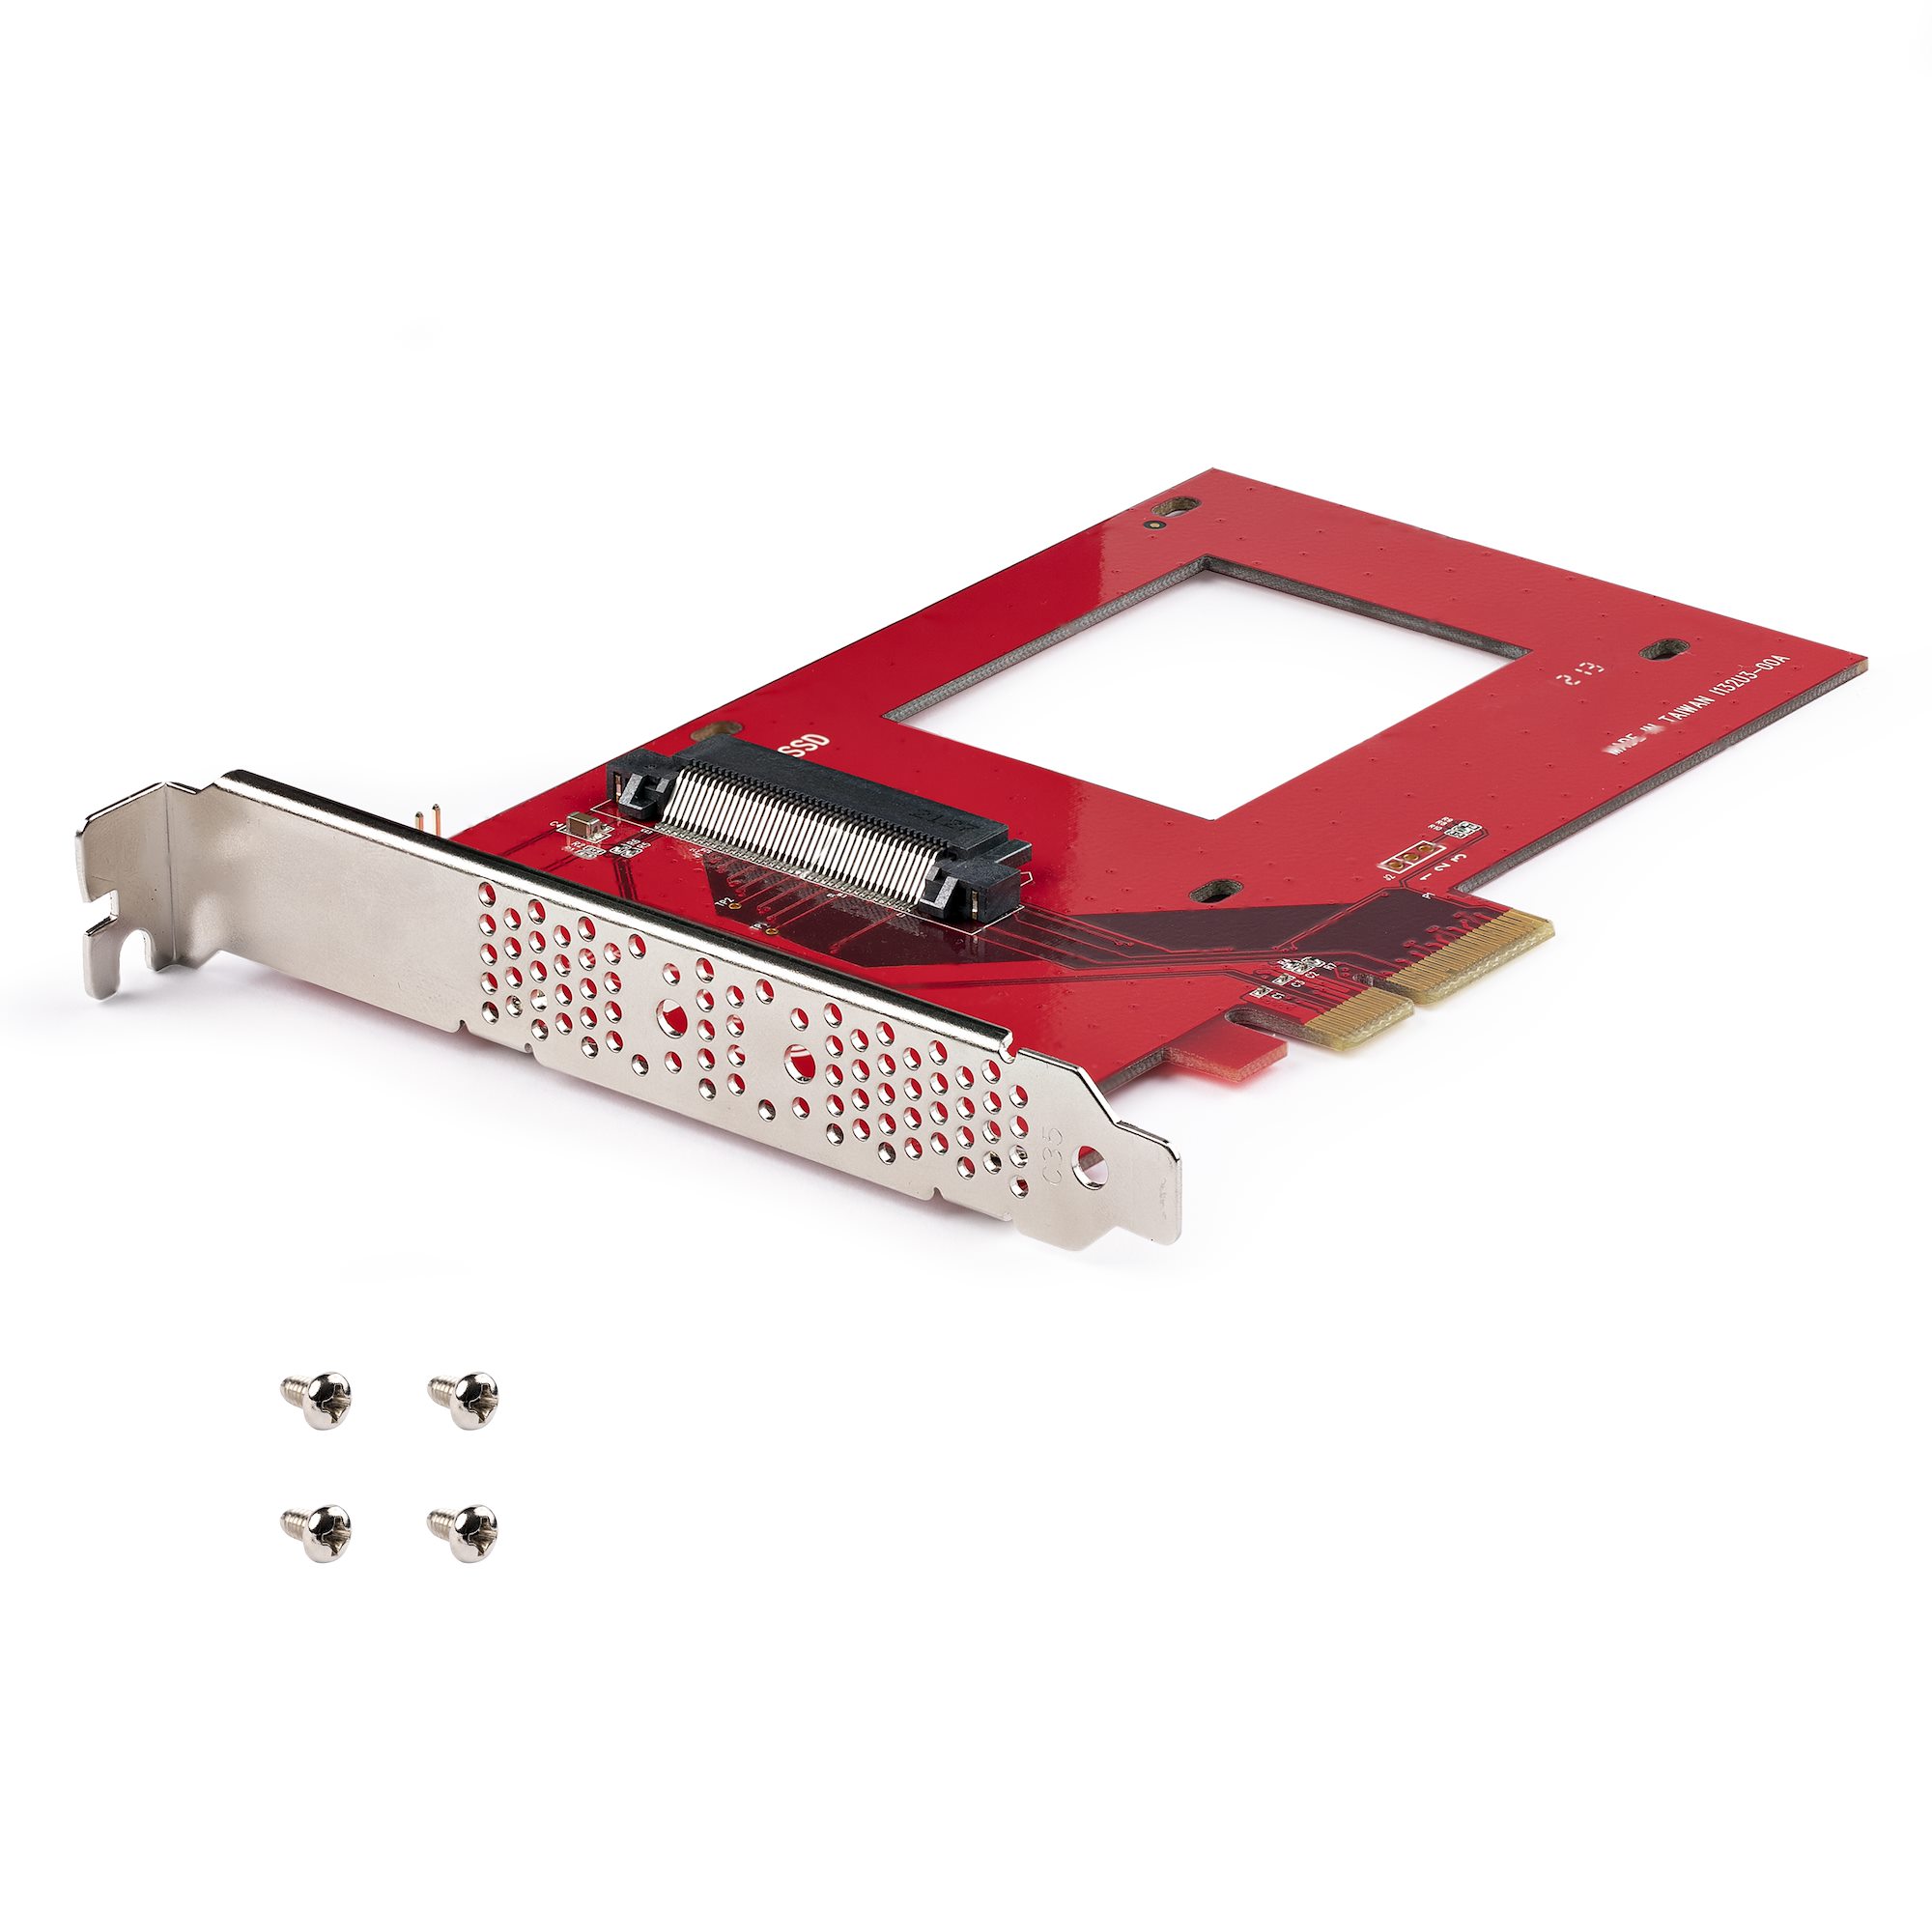 StarTech.com M.2. PCI-e NVMe to U.2 (SFF-8639) Adapter - Not Compatible  with SATA Drives or SAS Controllers - For M.2 PCIe NVMe SSDs - PCIe M.2  Drive